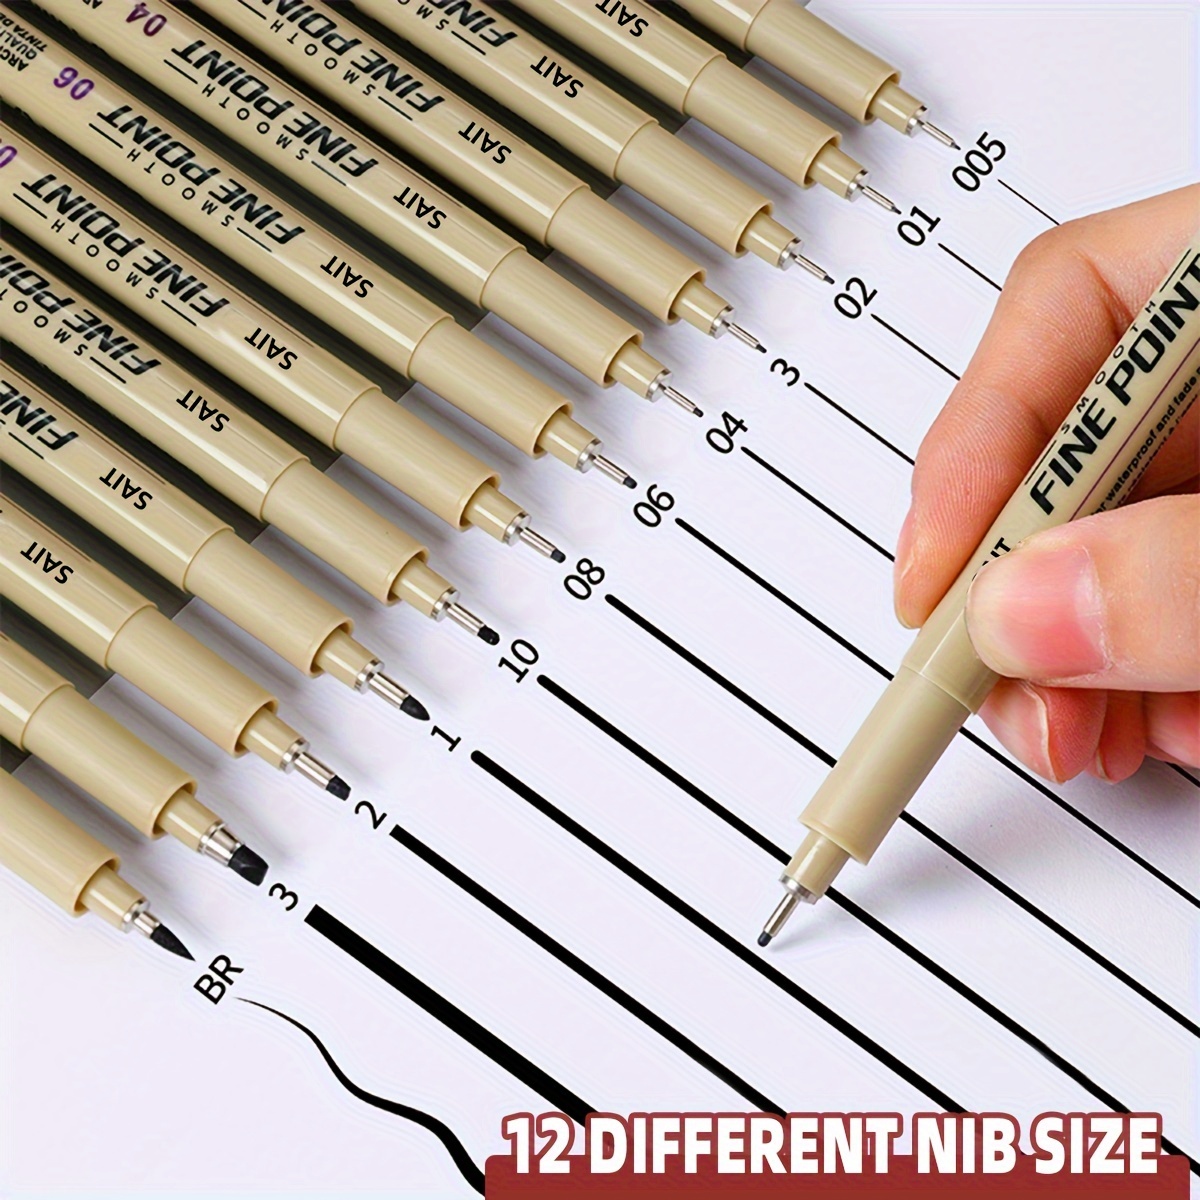 

12-pack Fine Point Pens Set With 12 Different Nib Sizes, Water-resistant Plastic Material, Extra Fine Point Type For Writing, Sketching, Illustration, And Technical Drawing